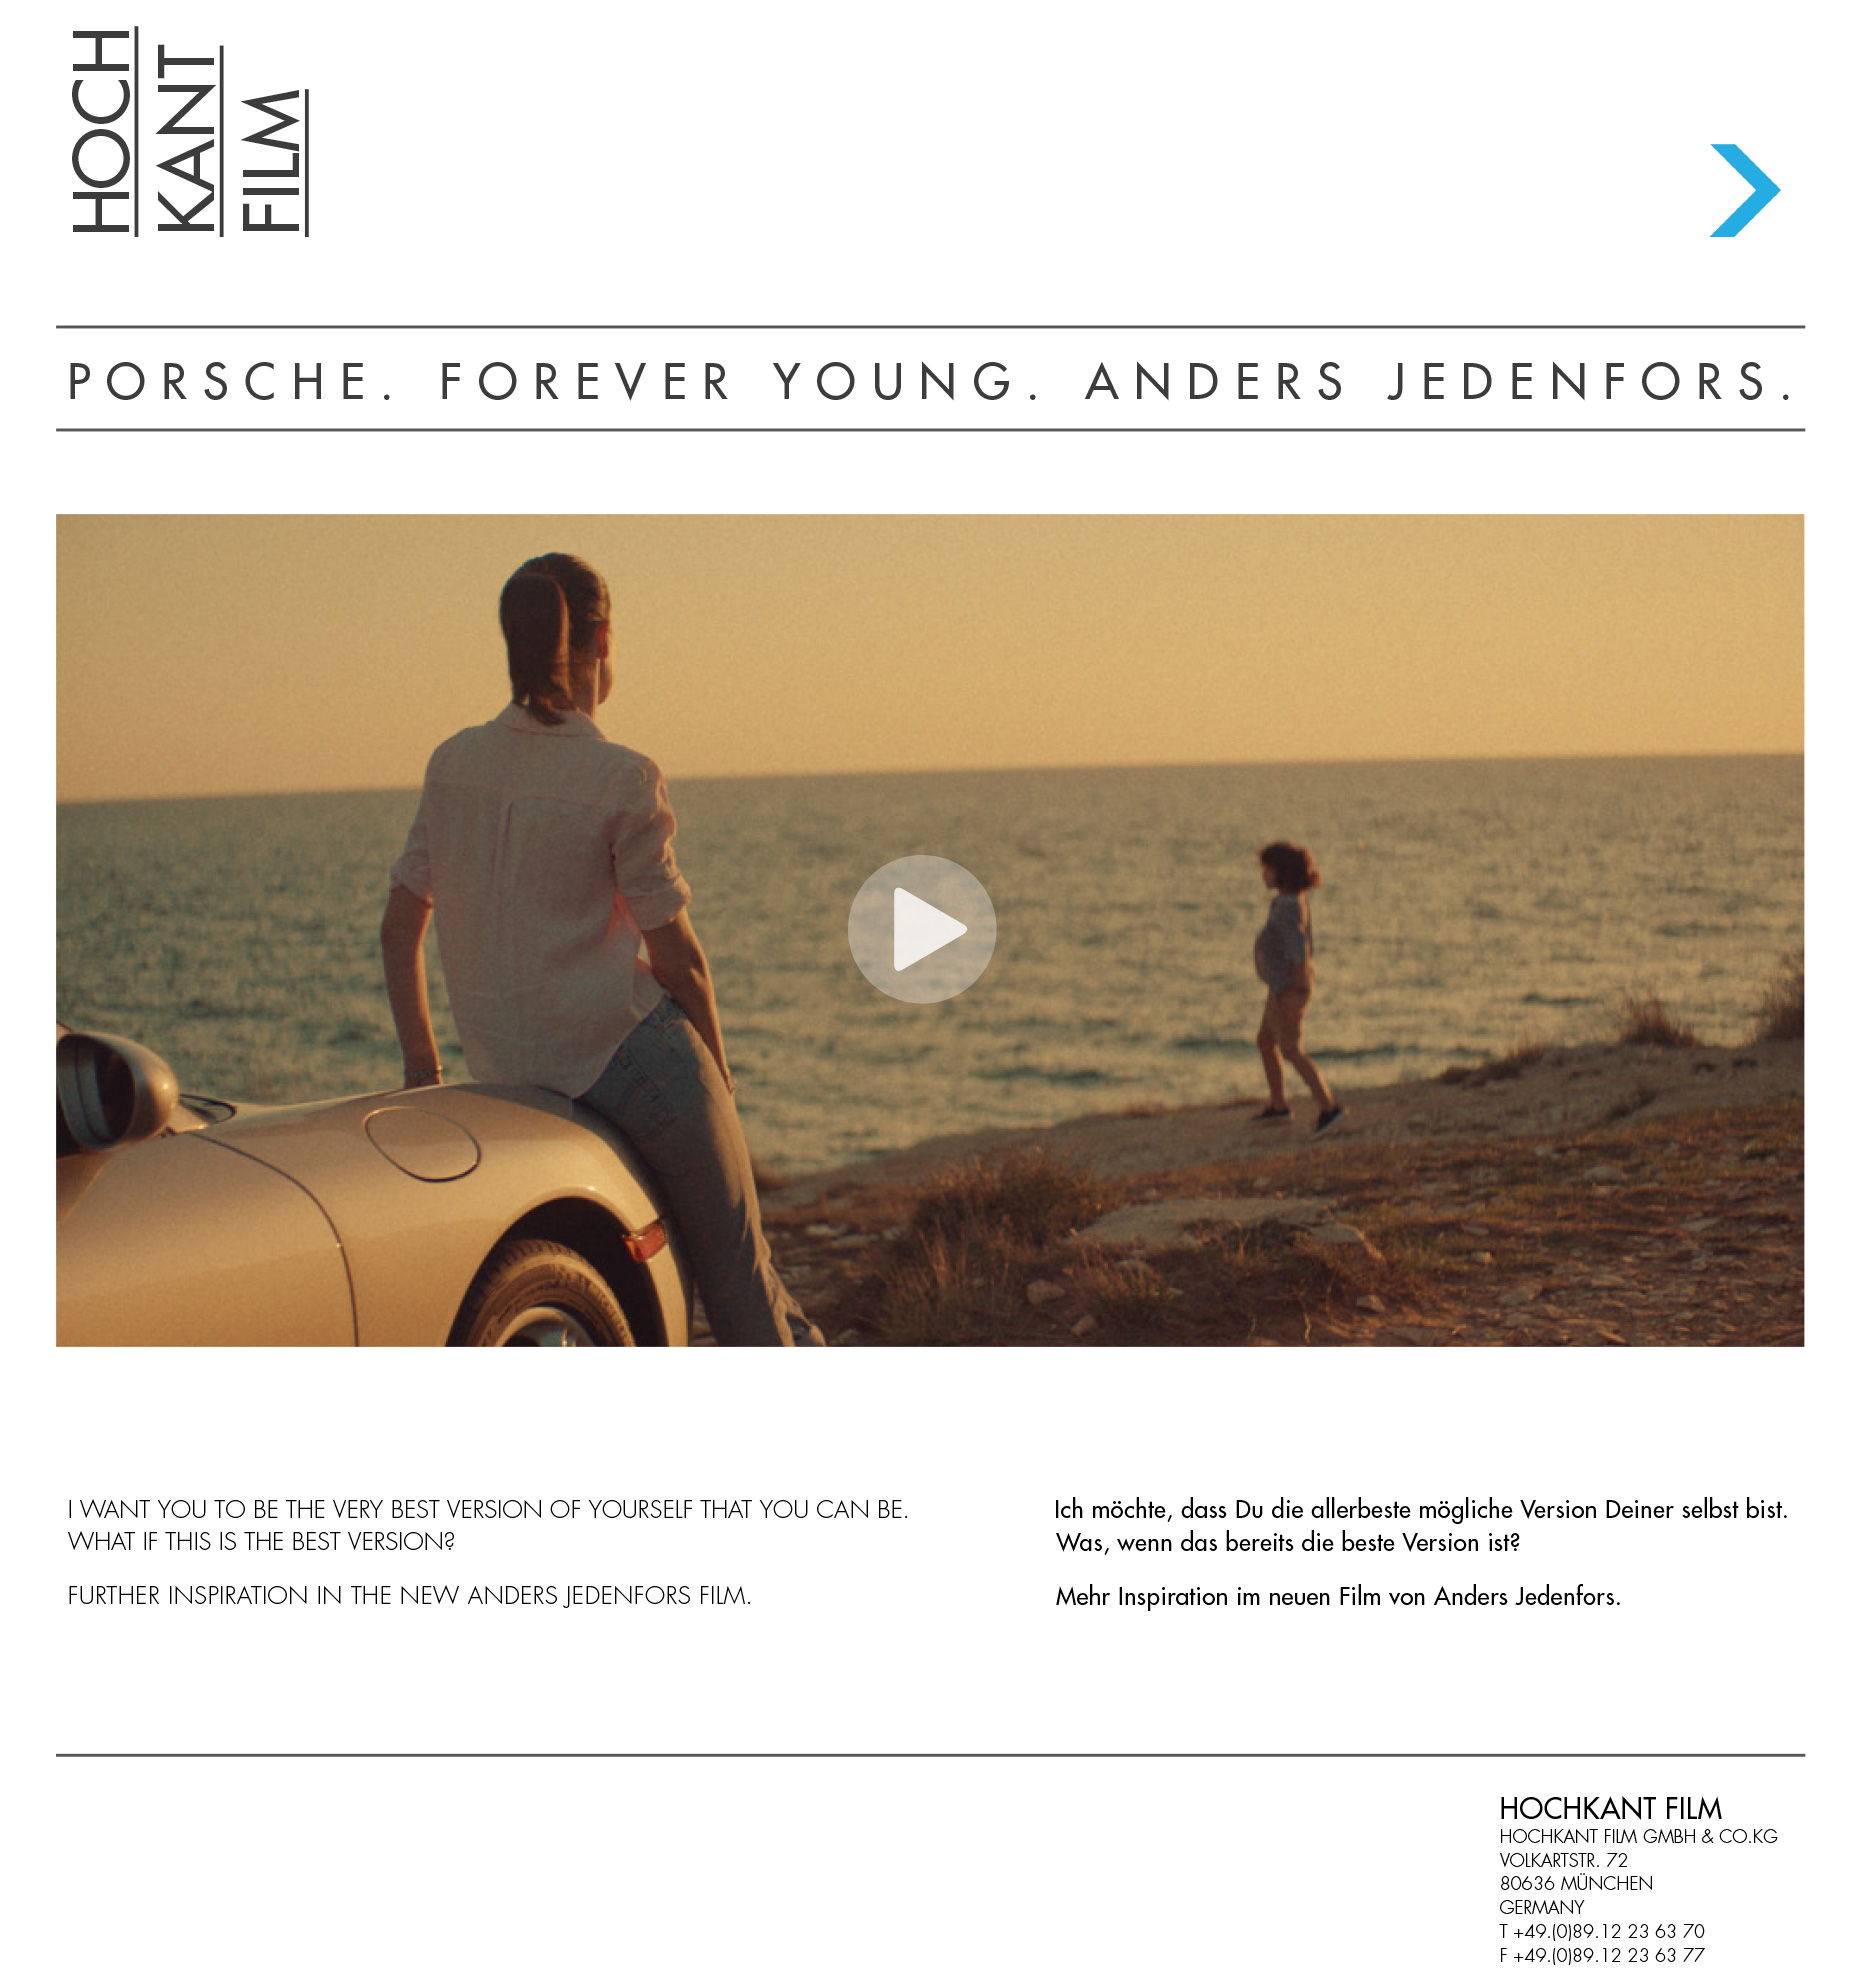 Forever Young - Anders Jedenfors